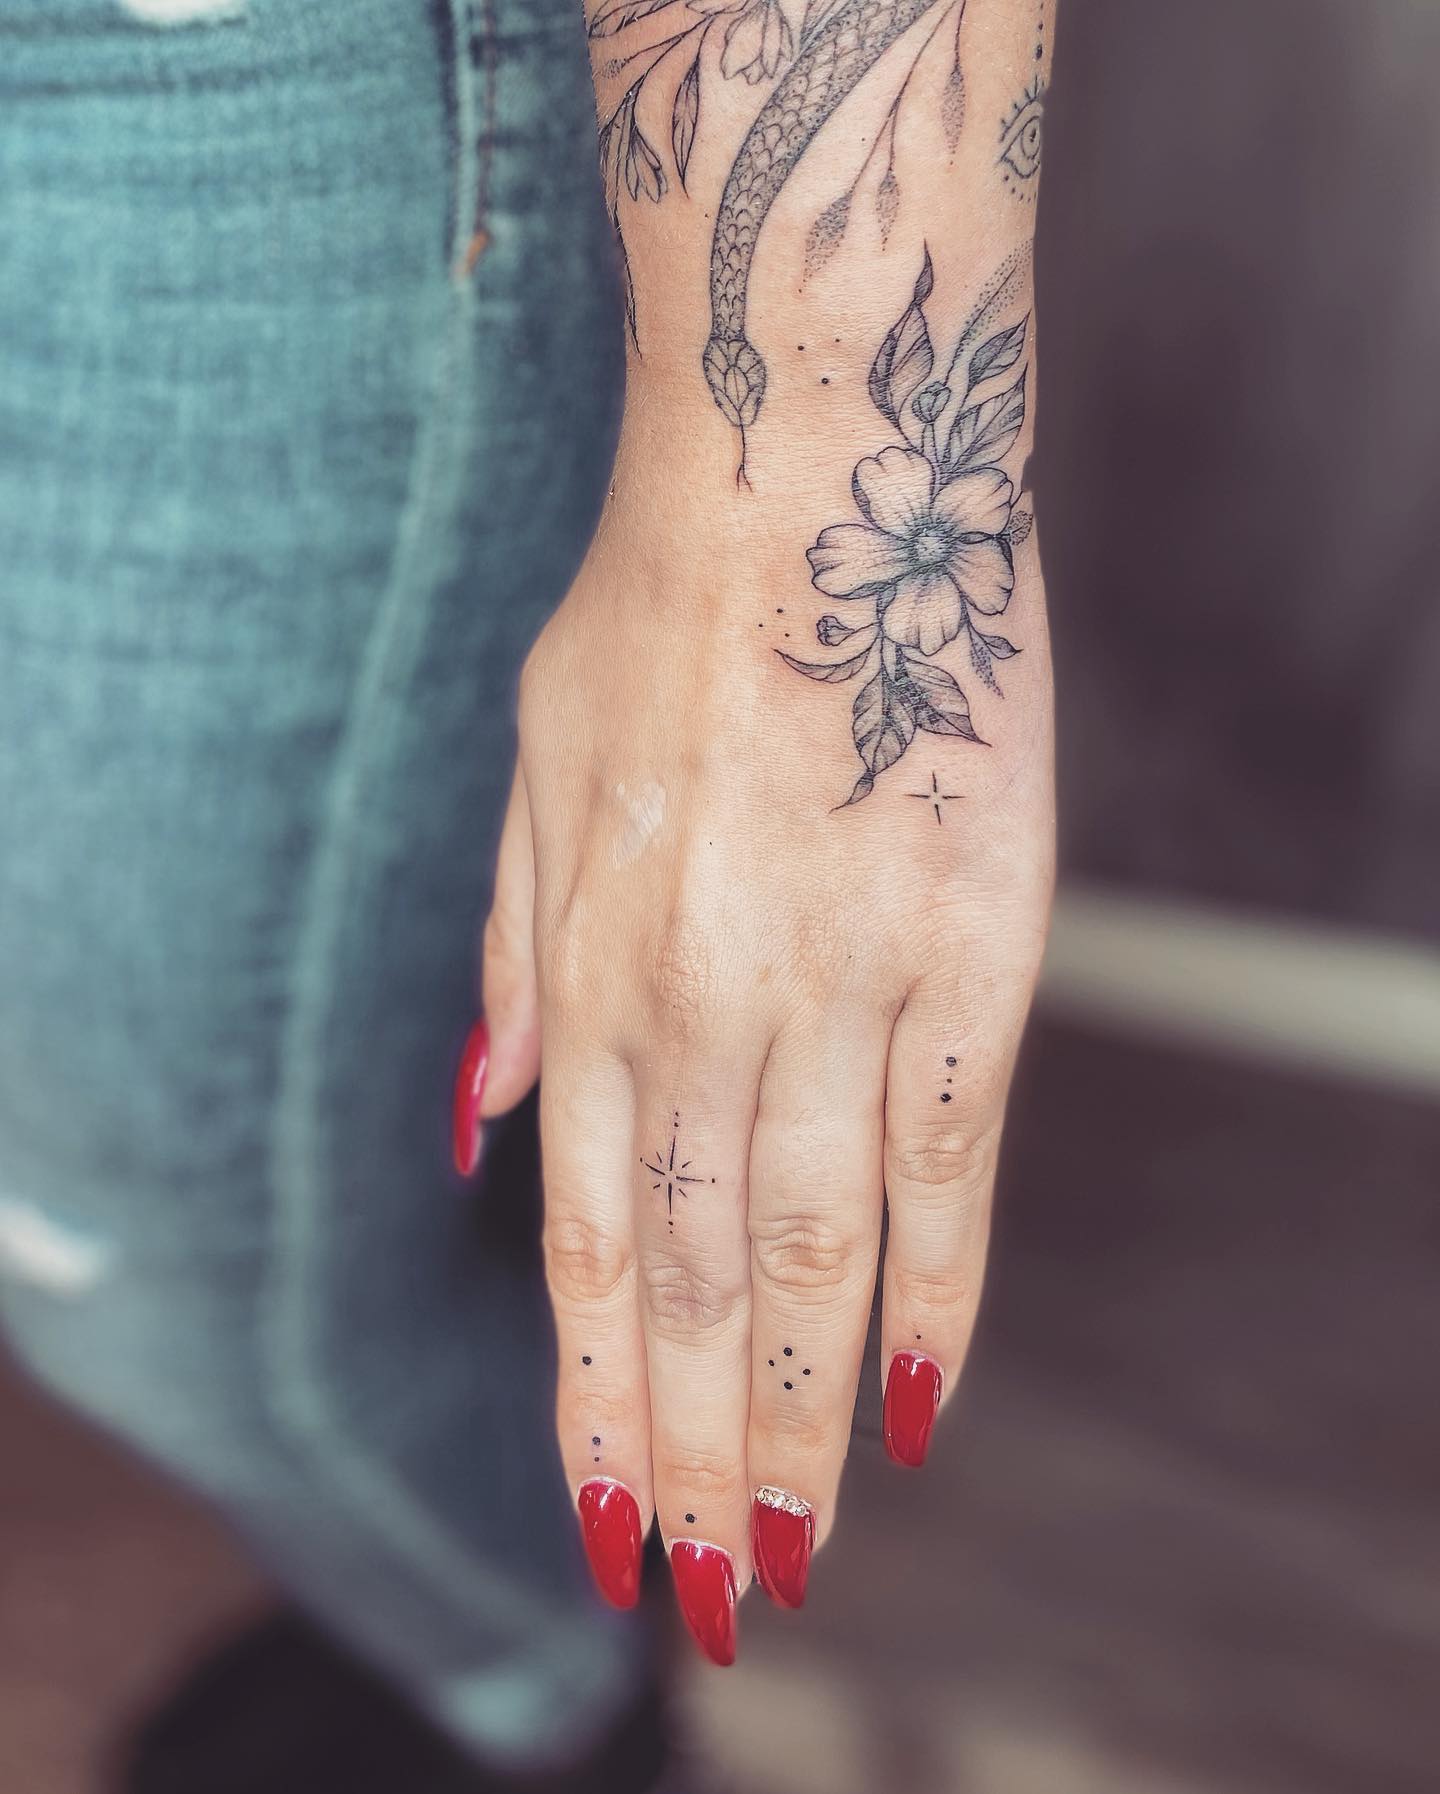 Love Tattoo Designs on Hand for Girl  Just iND